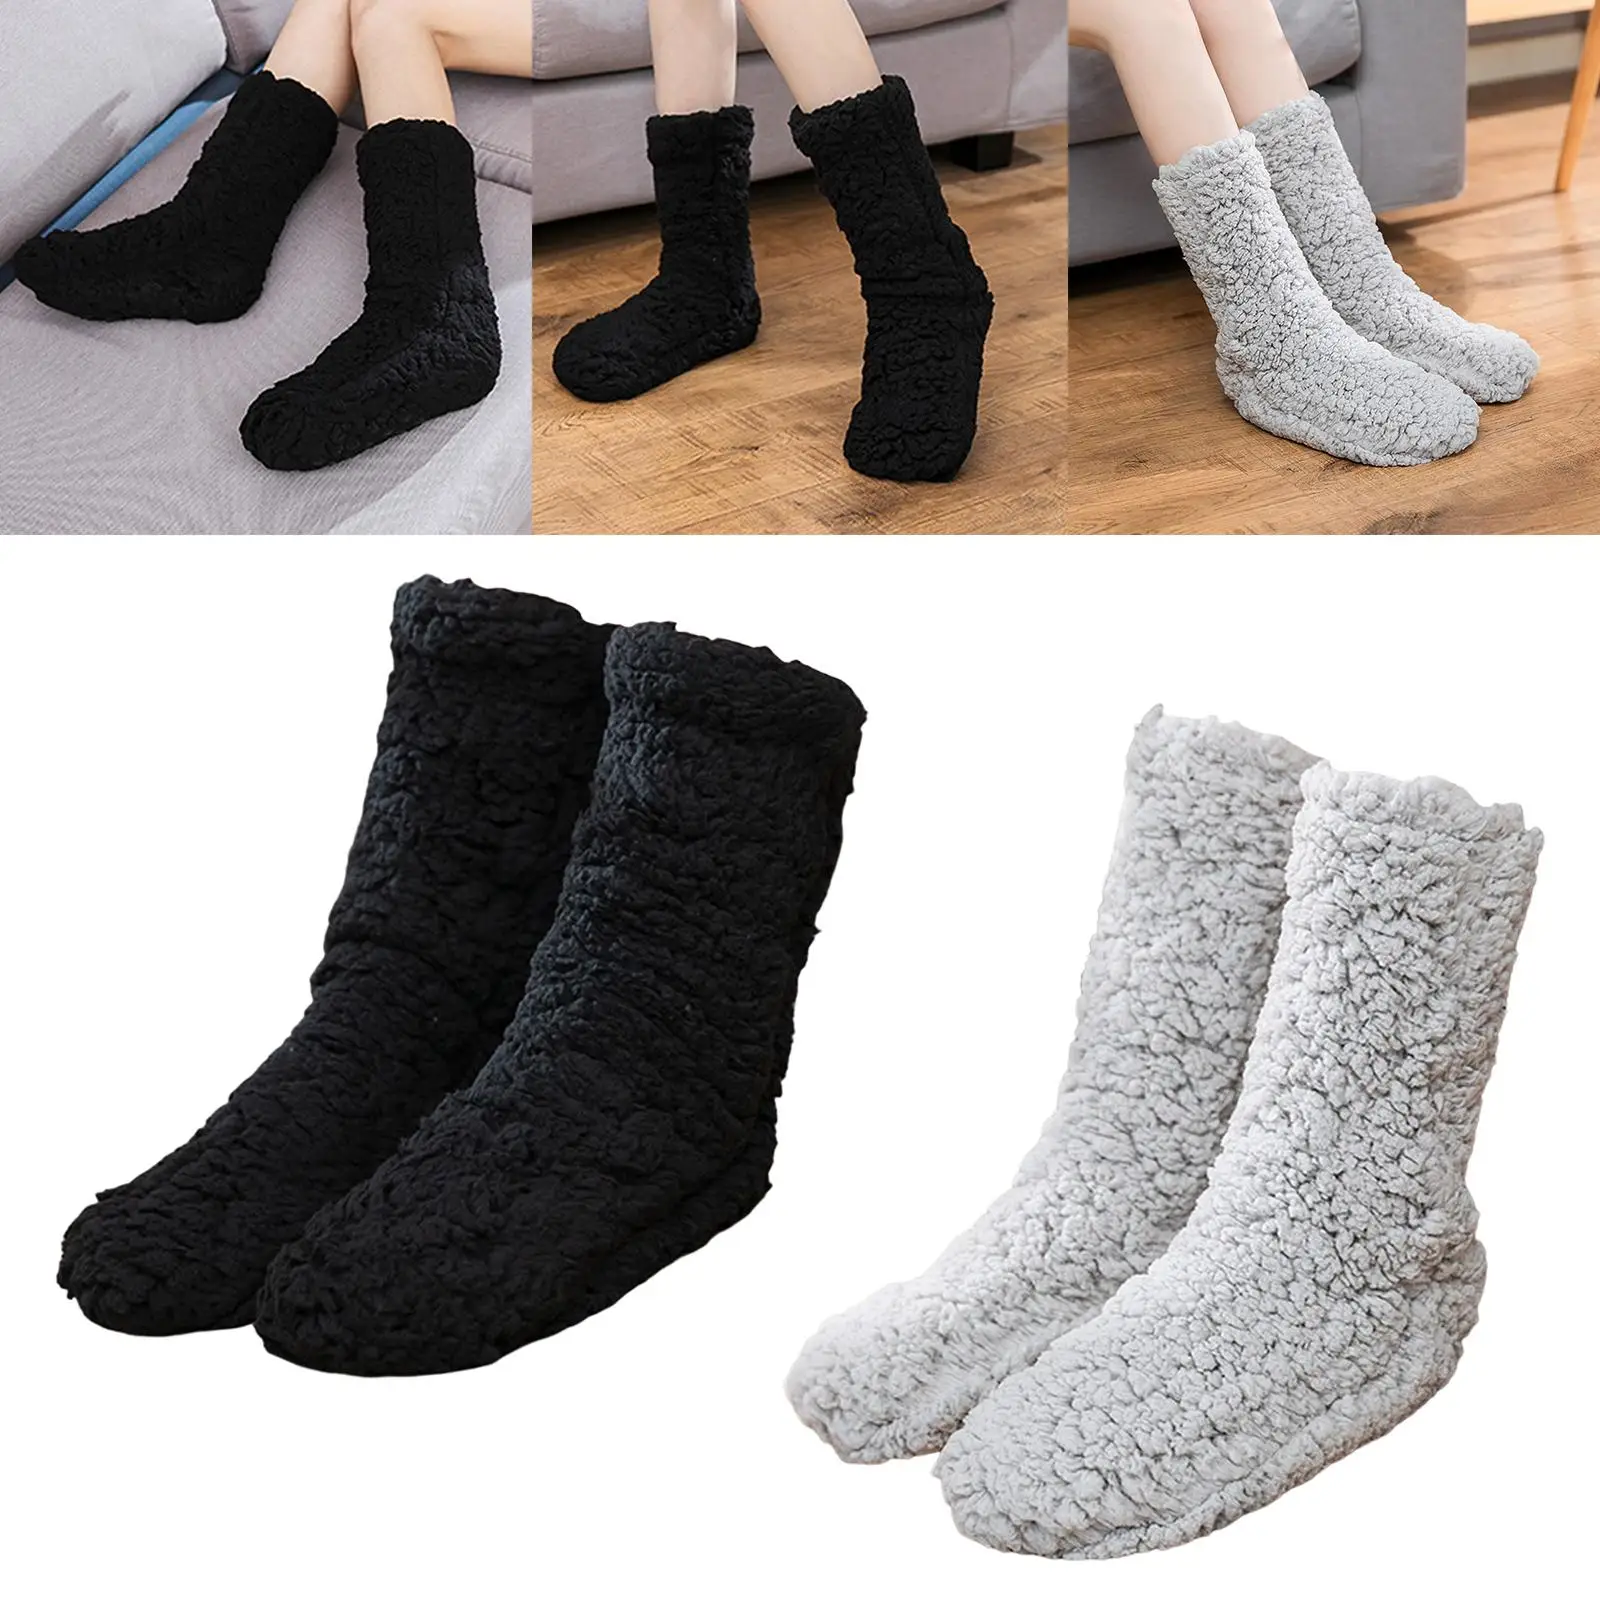 Women Winter Warm Socks Thermal Socks Home Slippers Thick Autumn Soft Non Slip Comfortable Casual Accessories